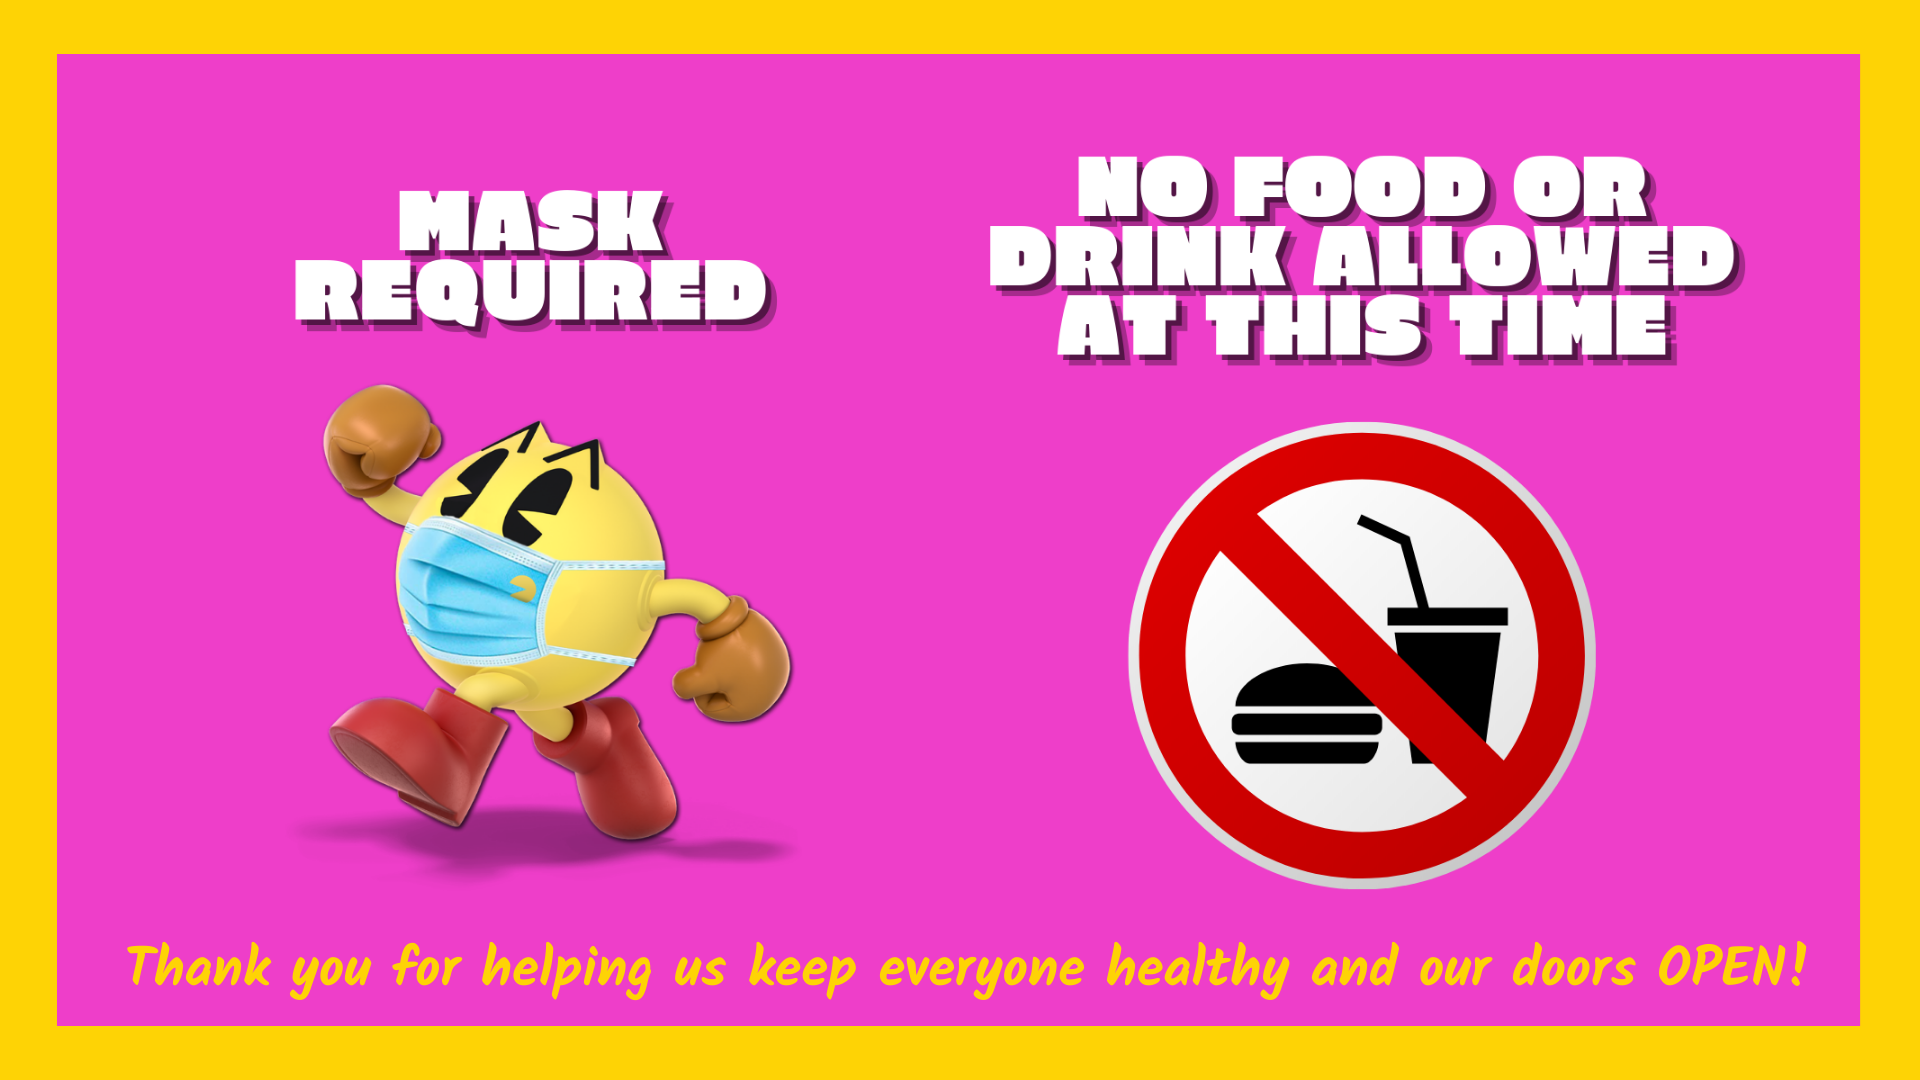 Masks required, no food or drink allowed